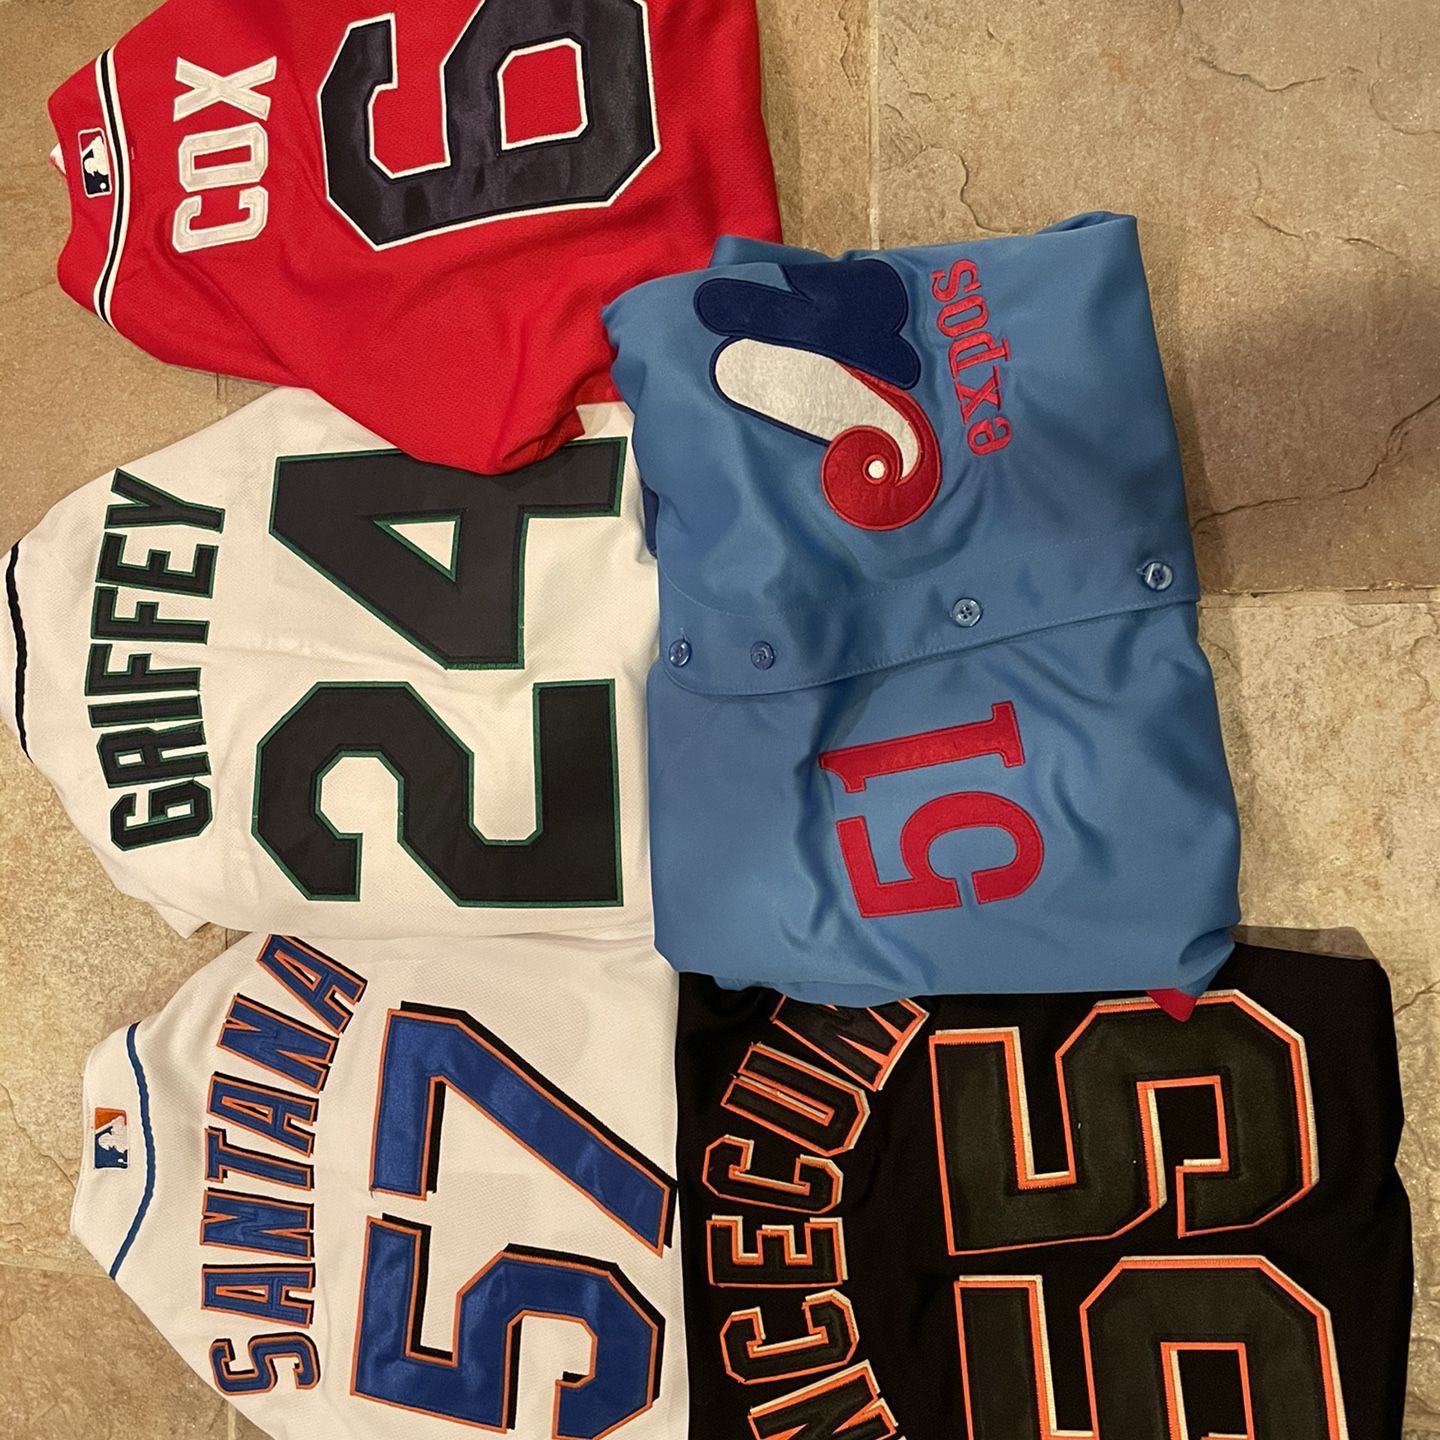 All Stitched Baseball Jerseys With Tags